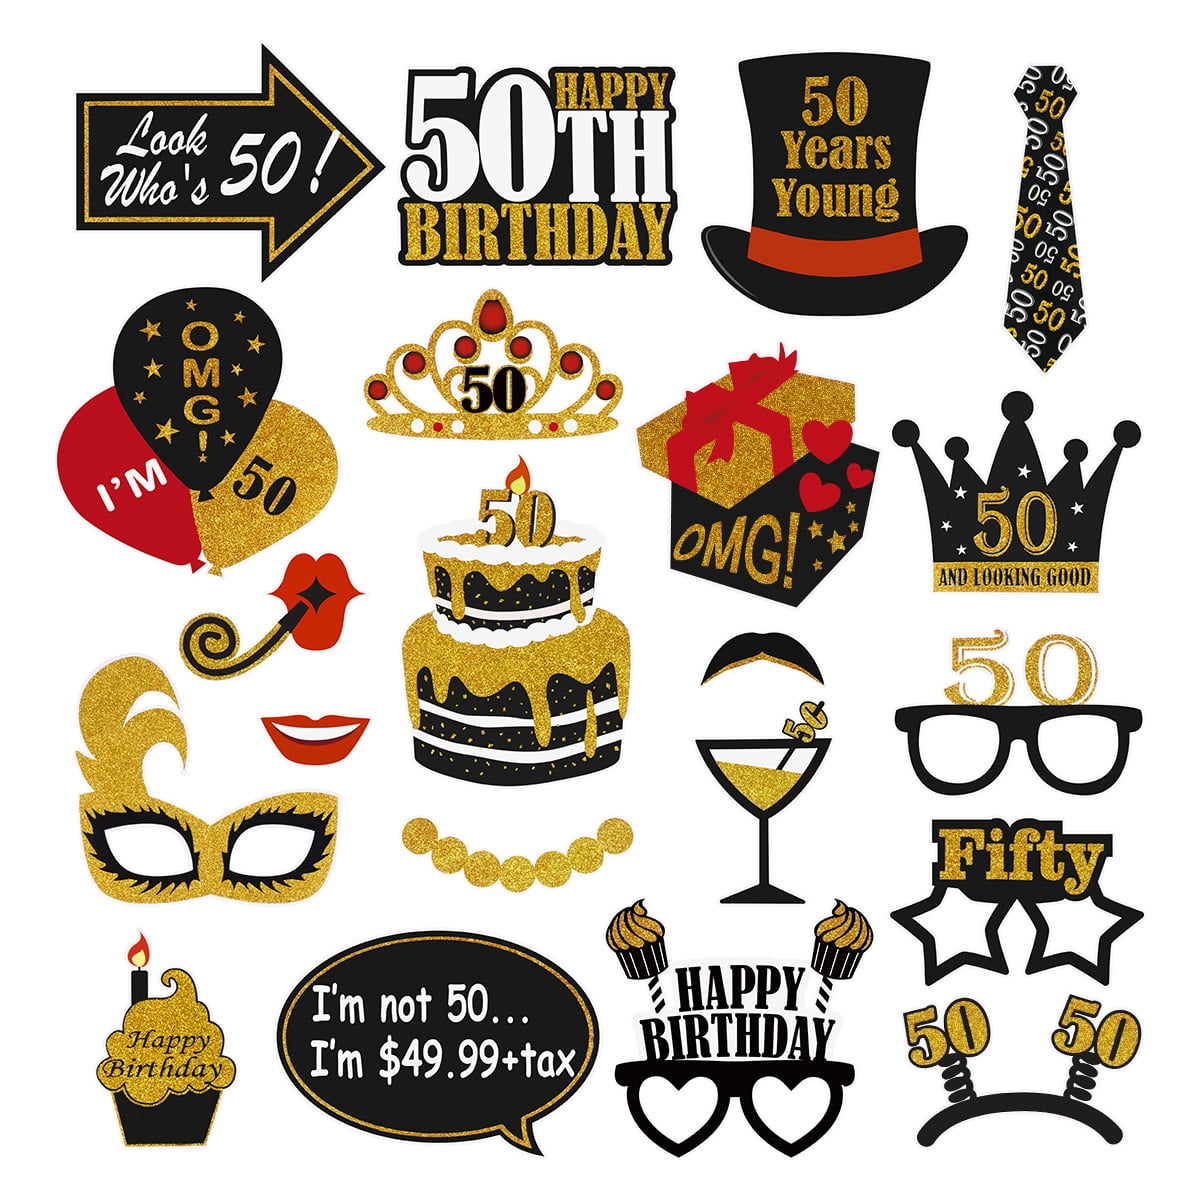 Details about   BIRTHDAY GIRL 50 TH PARTY SASHES FIFTY ACCESSORY FUN GIFT SASH NIGHT OUT 50TH 